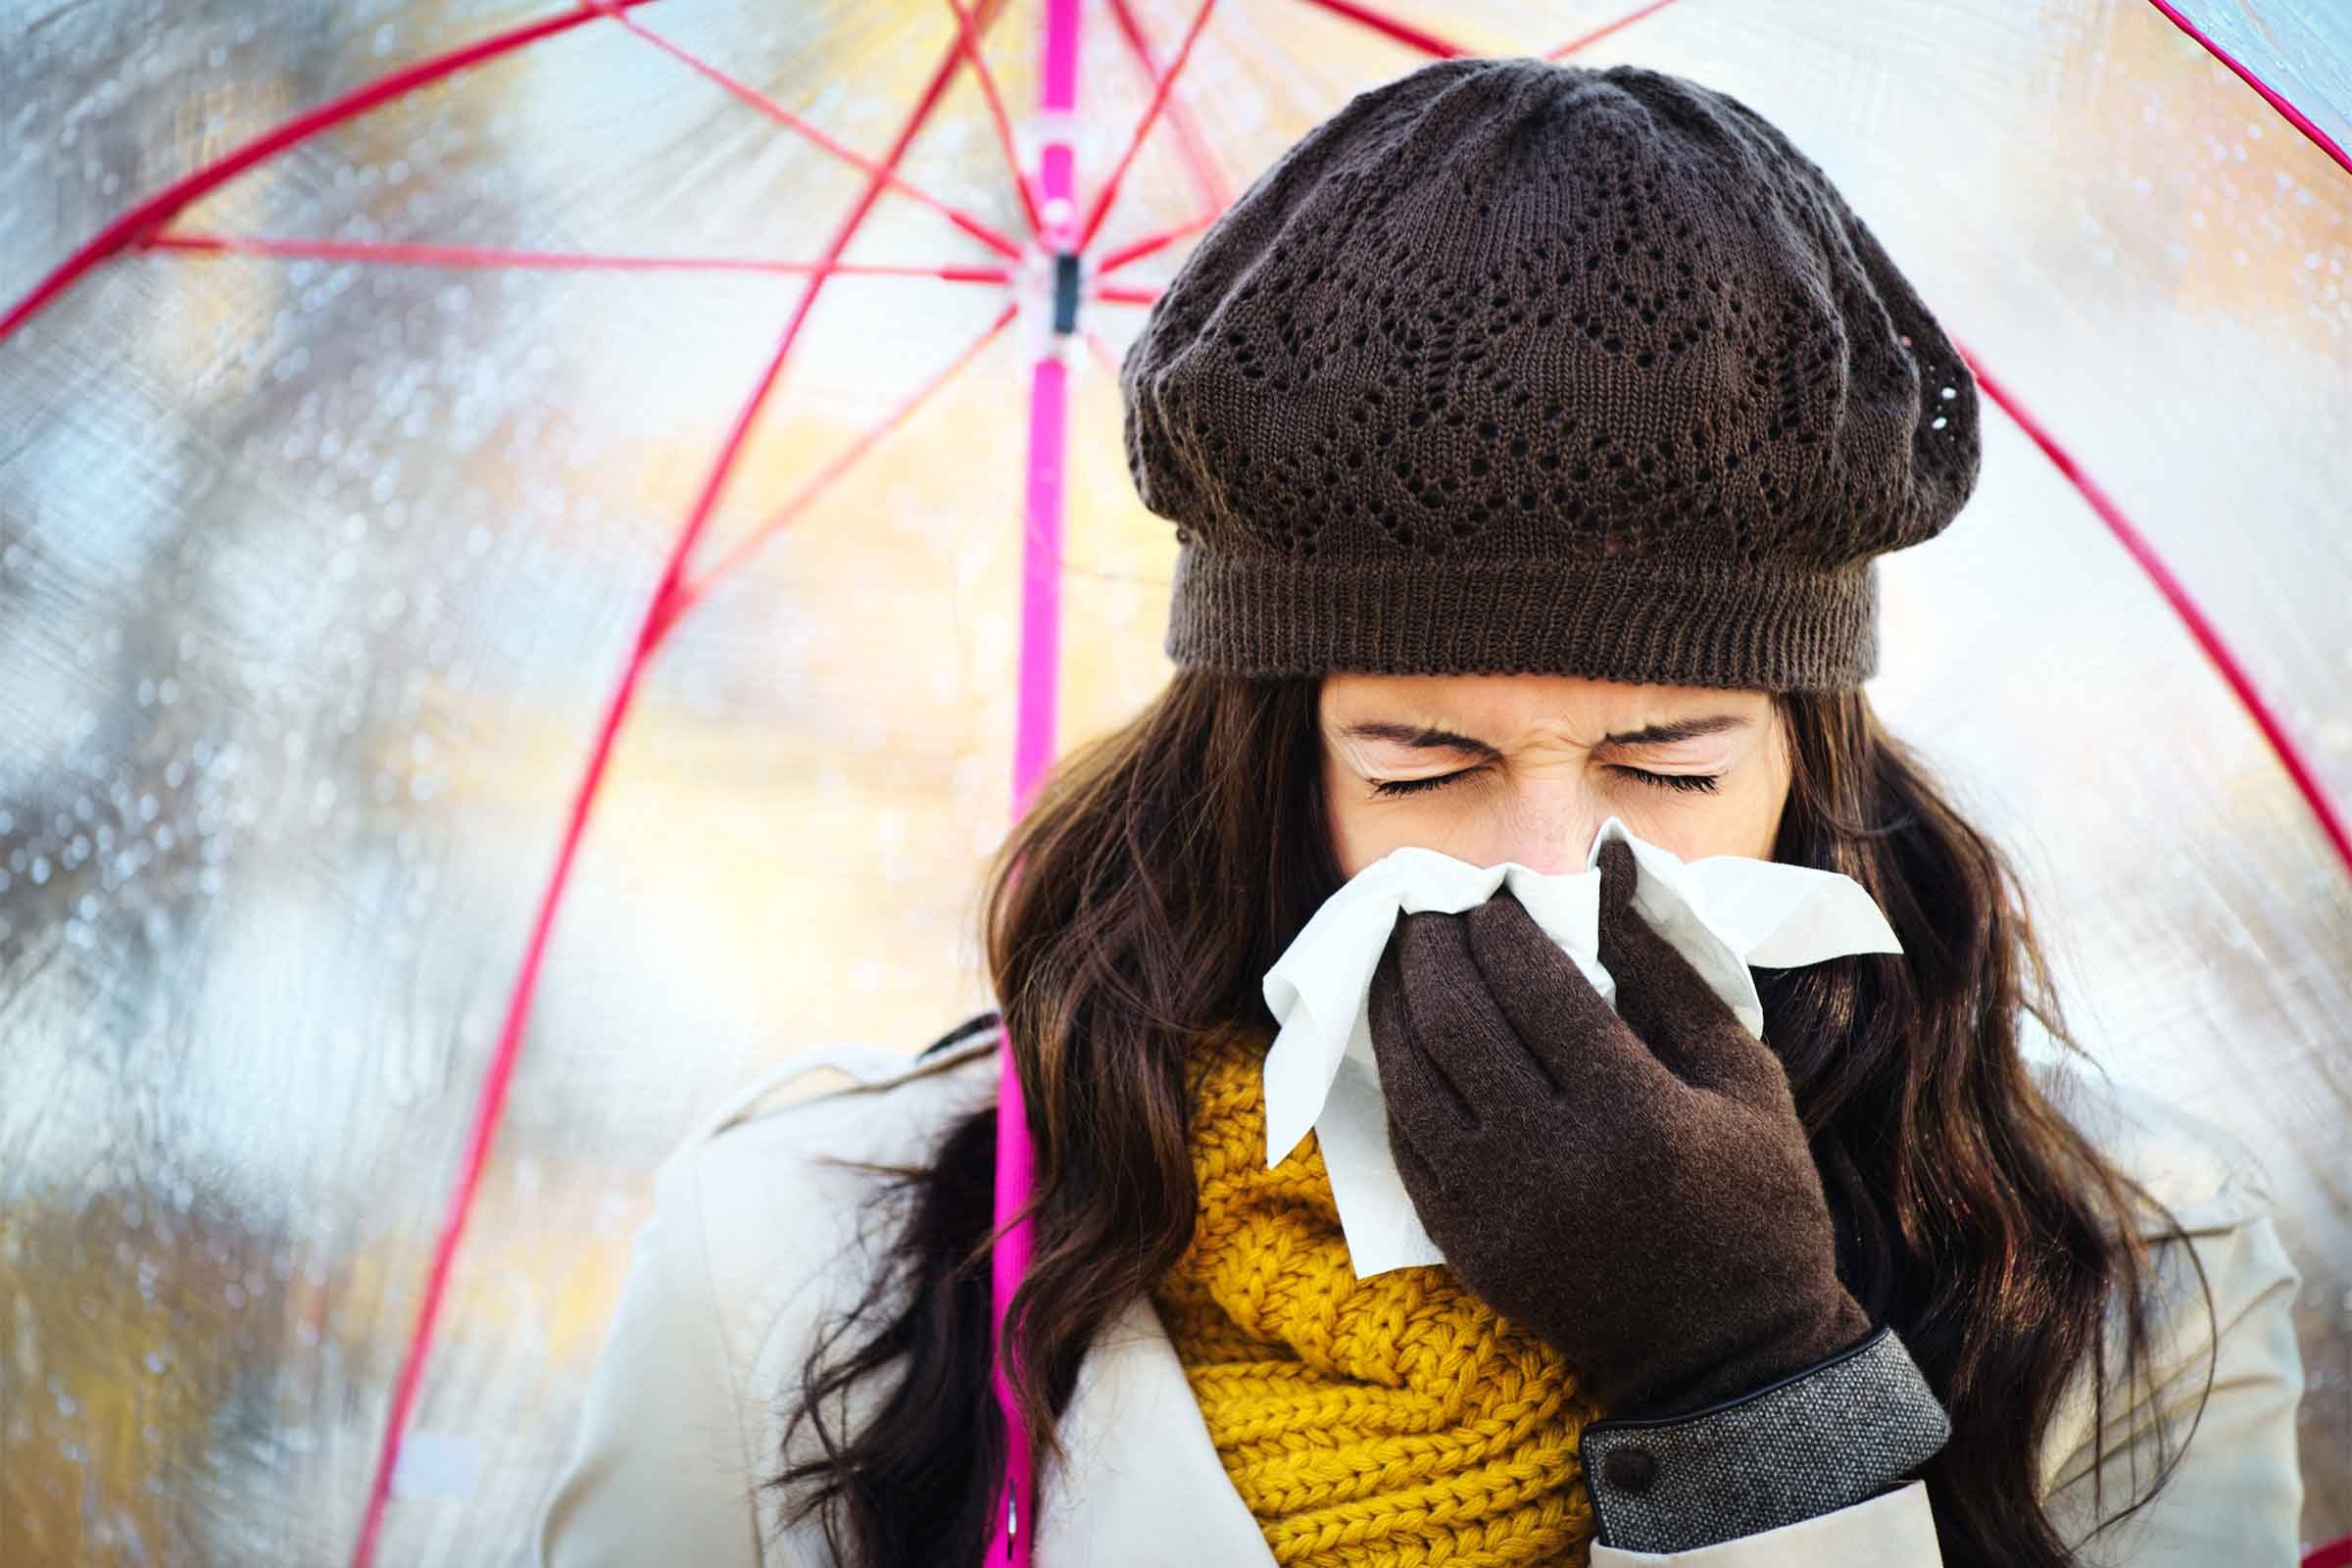 Study Suggests You May Be More Likely to Catch Cold in Cold Weather